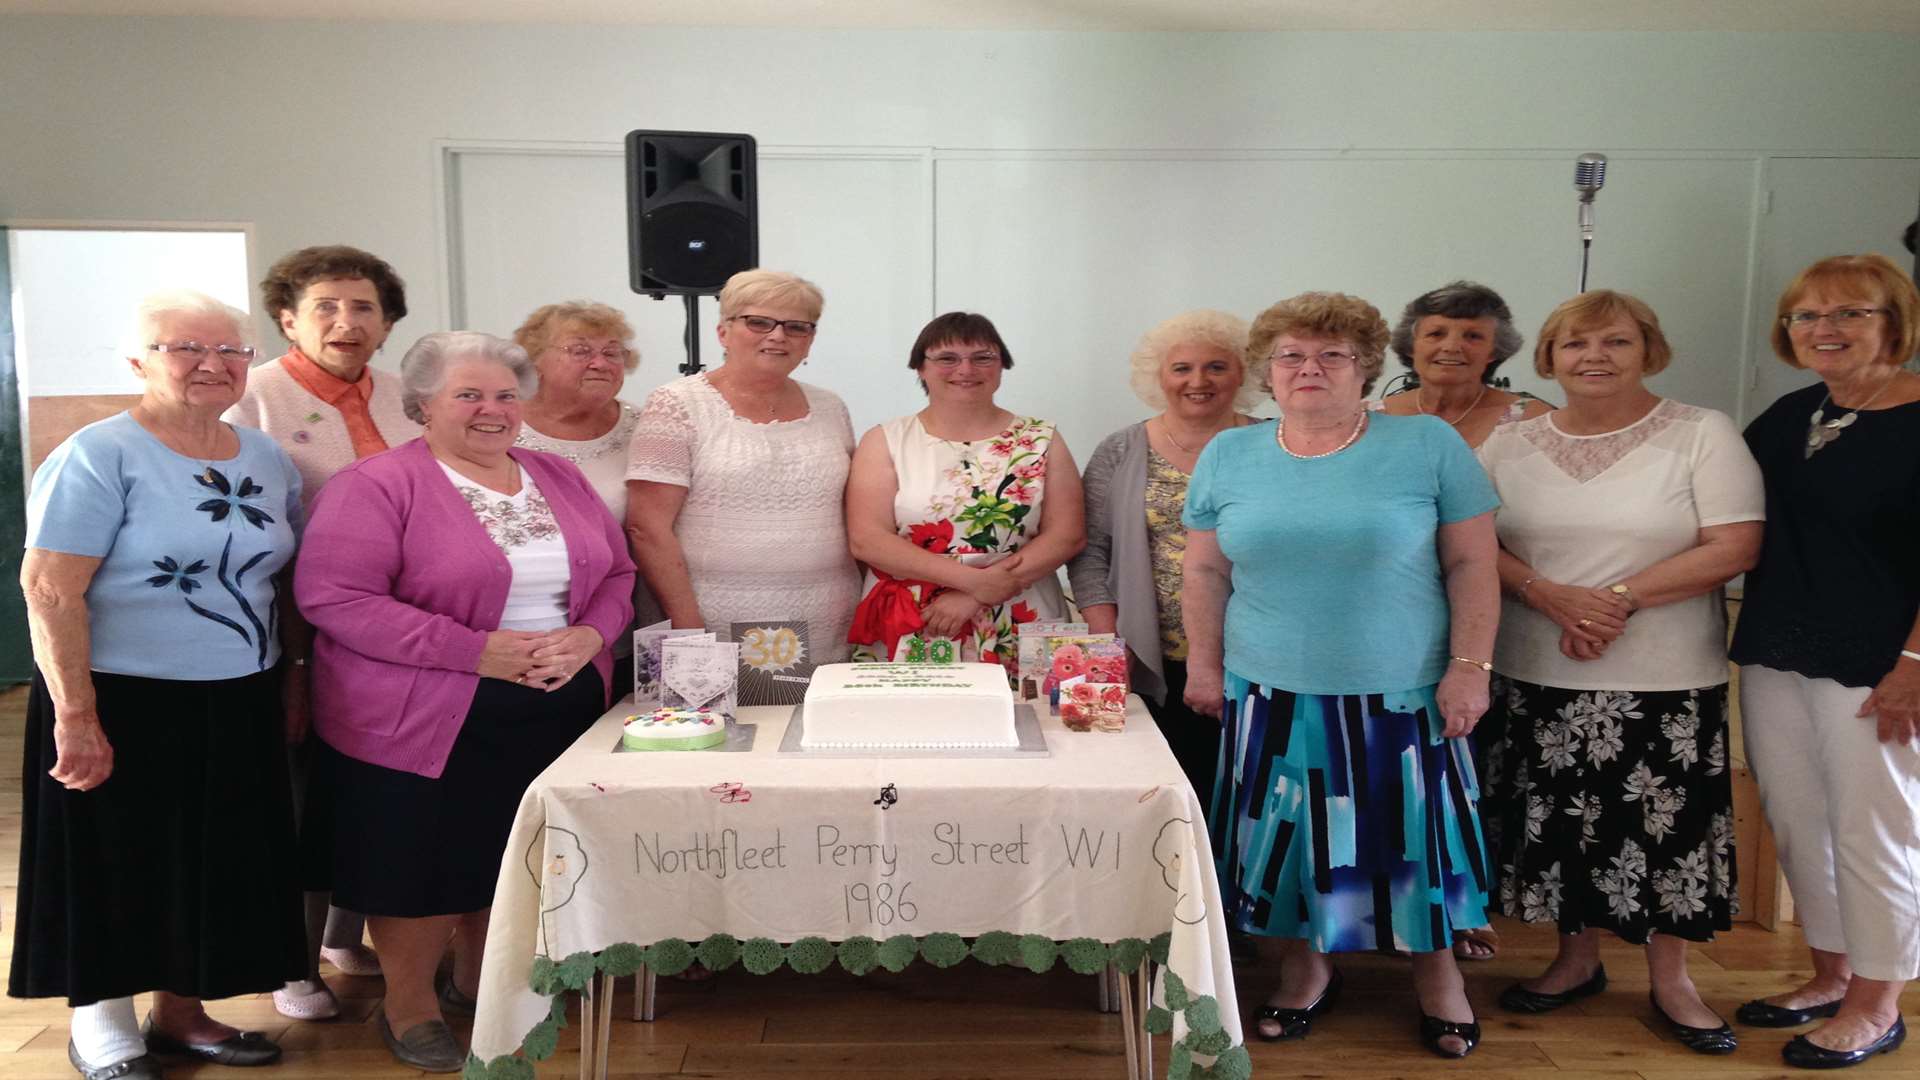 Northfleet's WI Committee which was in charge of organizing the afternoon tea.